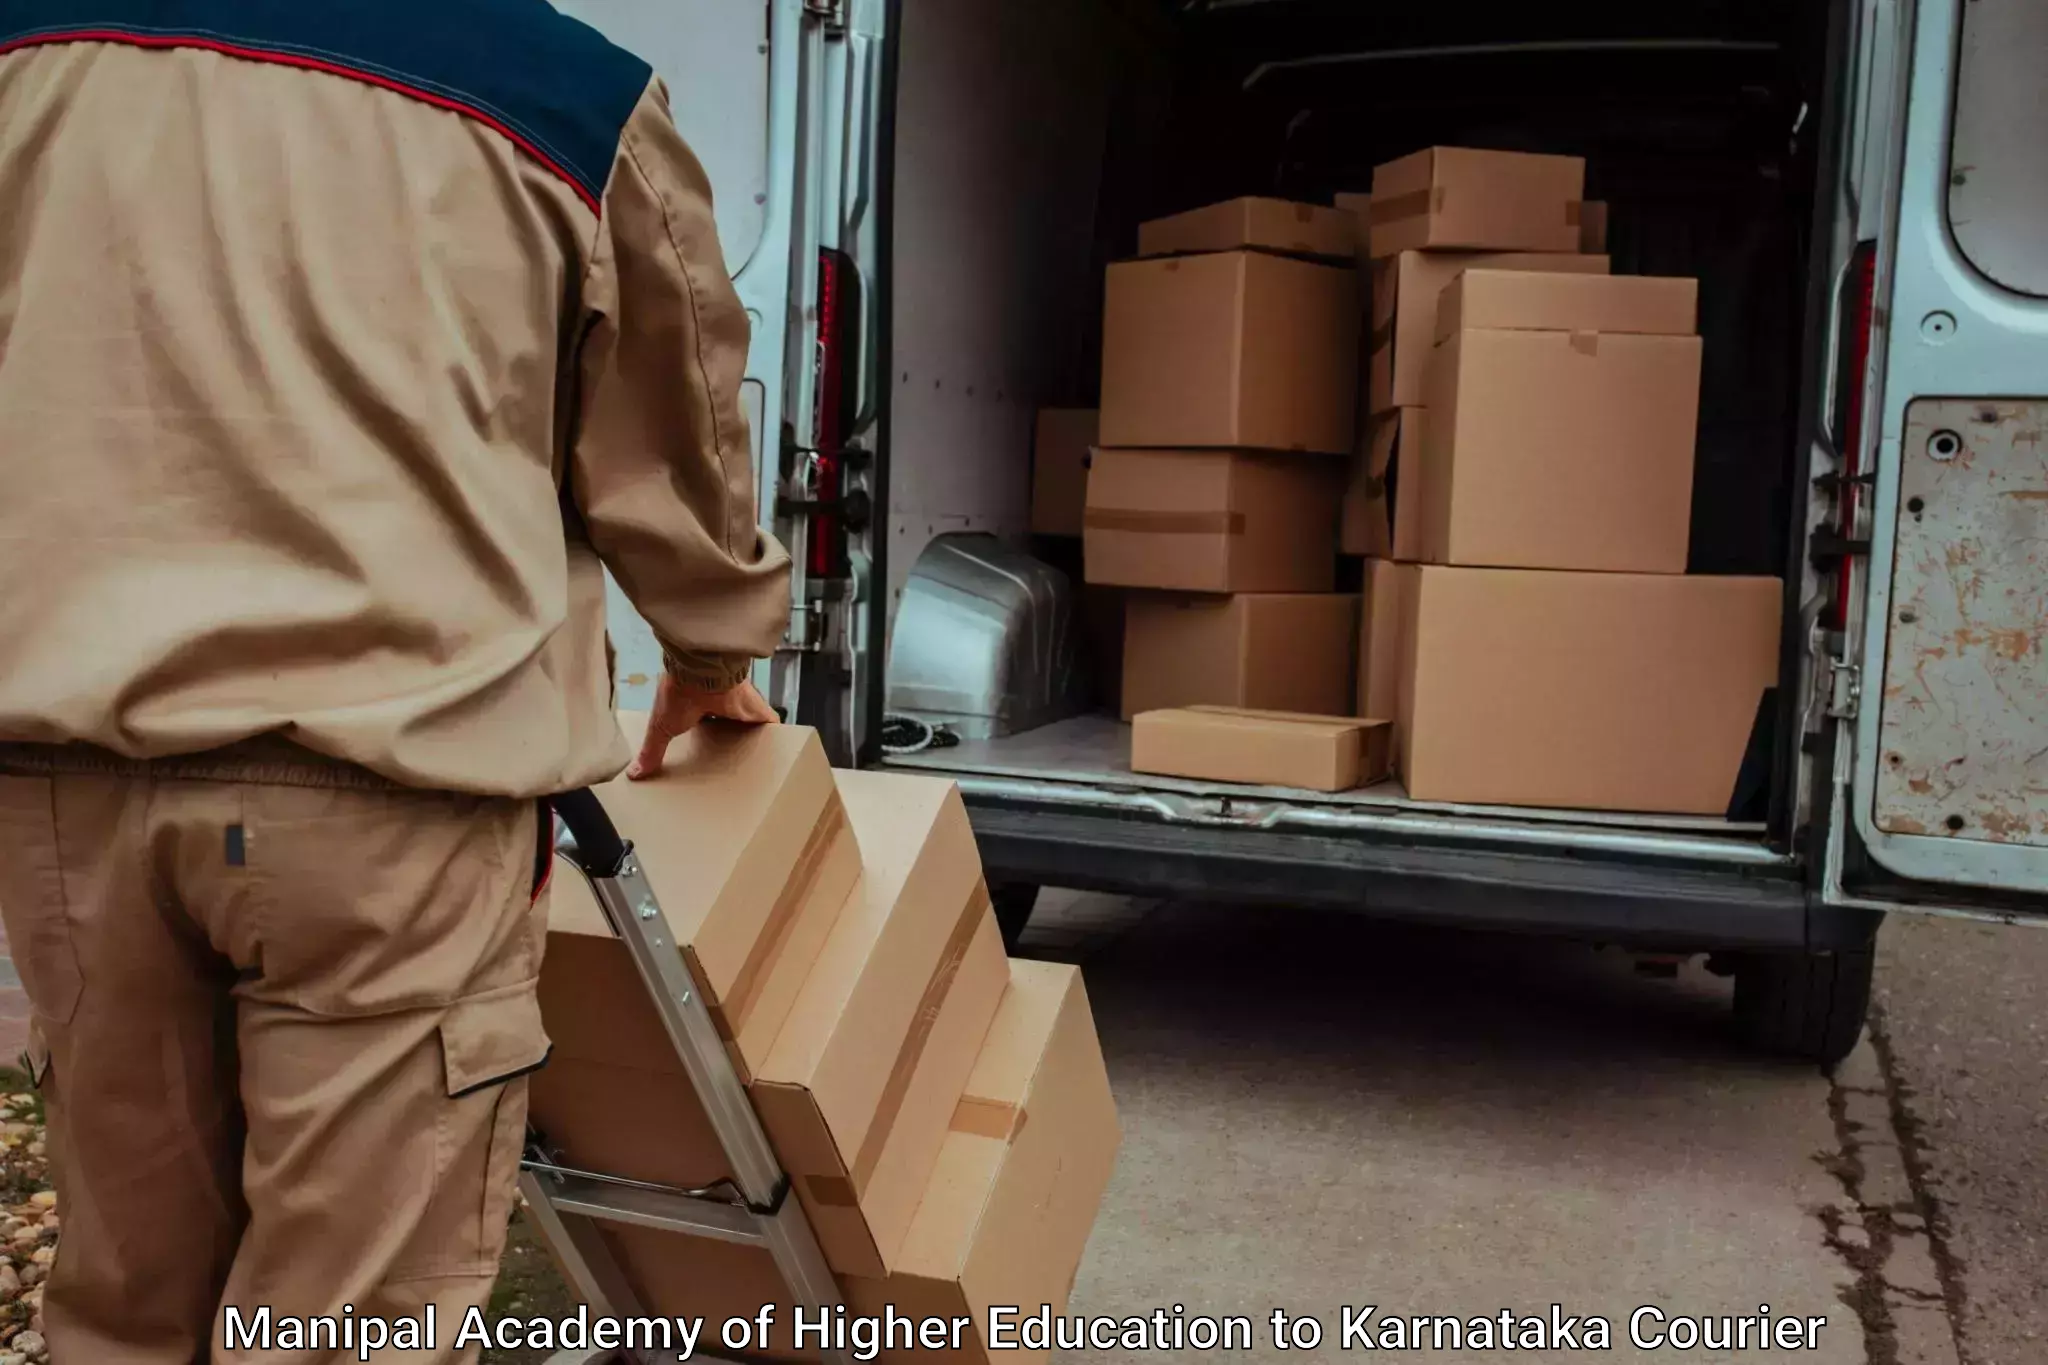 Moving and storage services in Manipal Academy of Higher Education to Karnataka